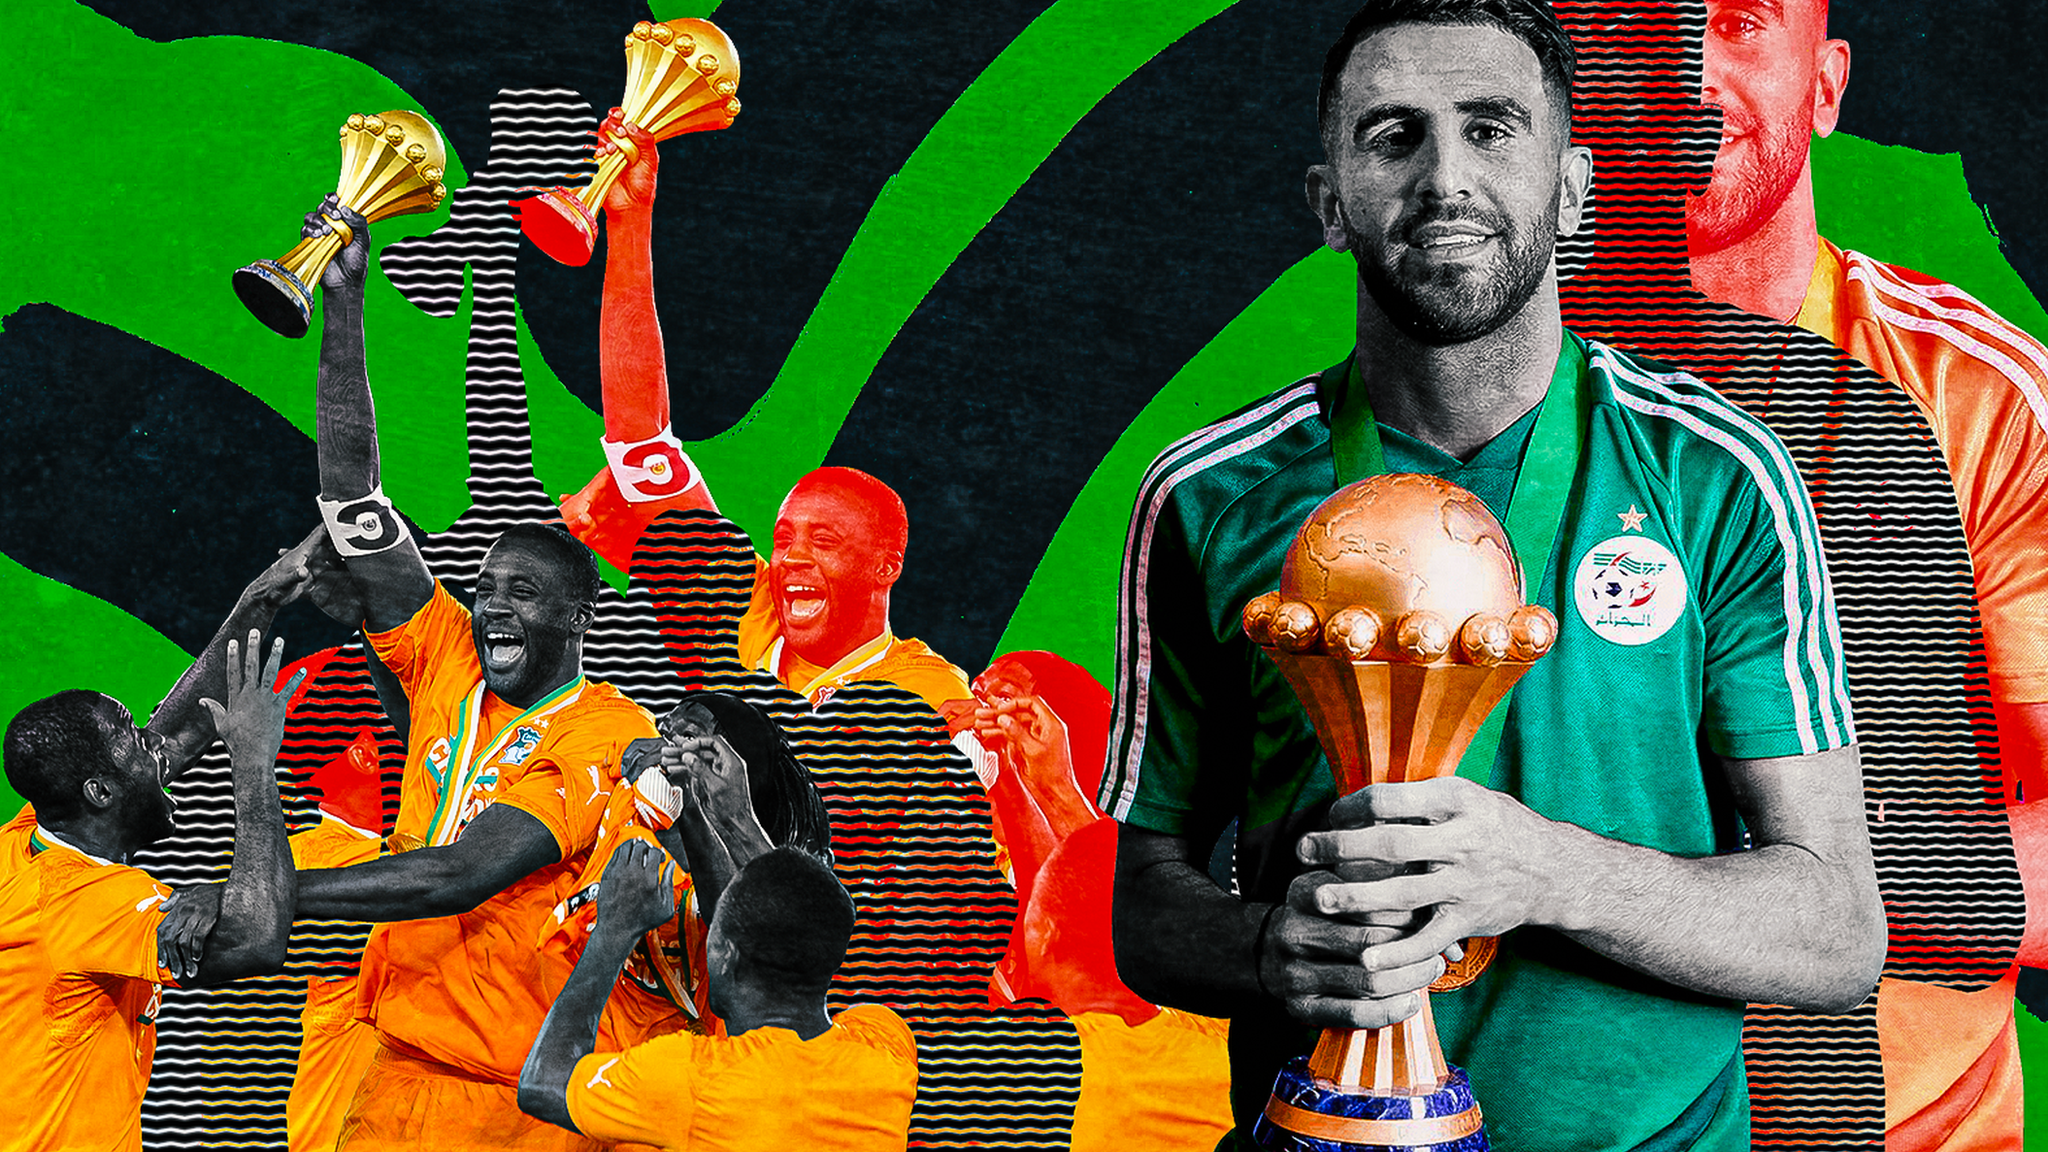 Afcon 2023 qualifiers: Who still has a chance to qualify? - BBC Sport